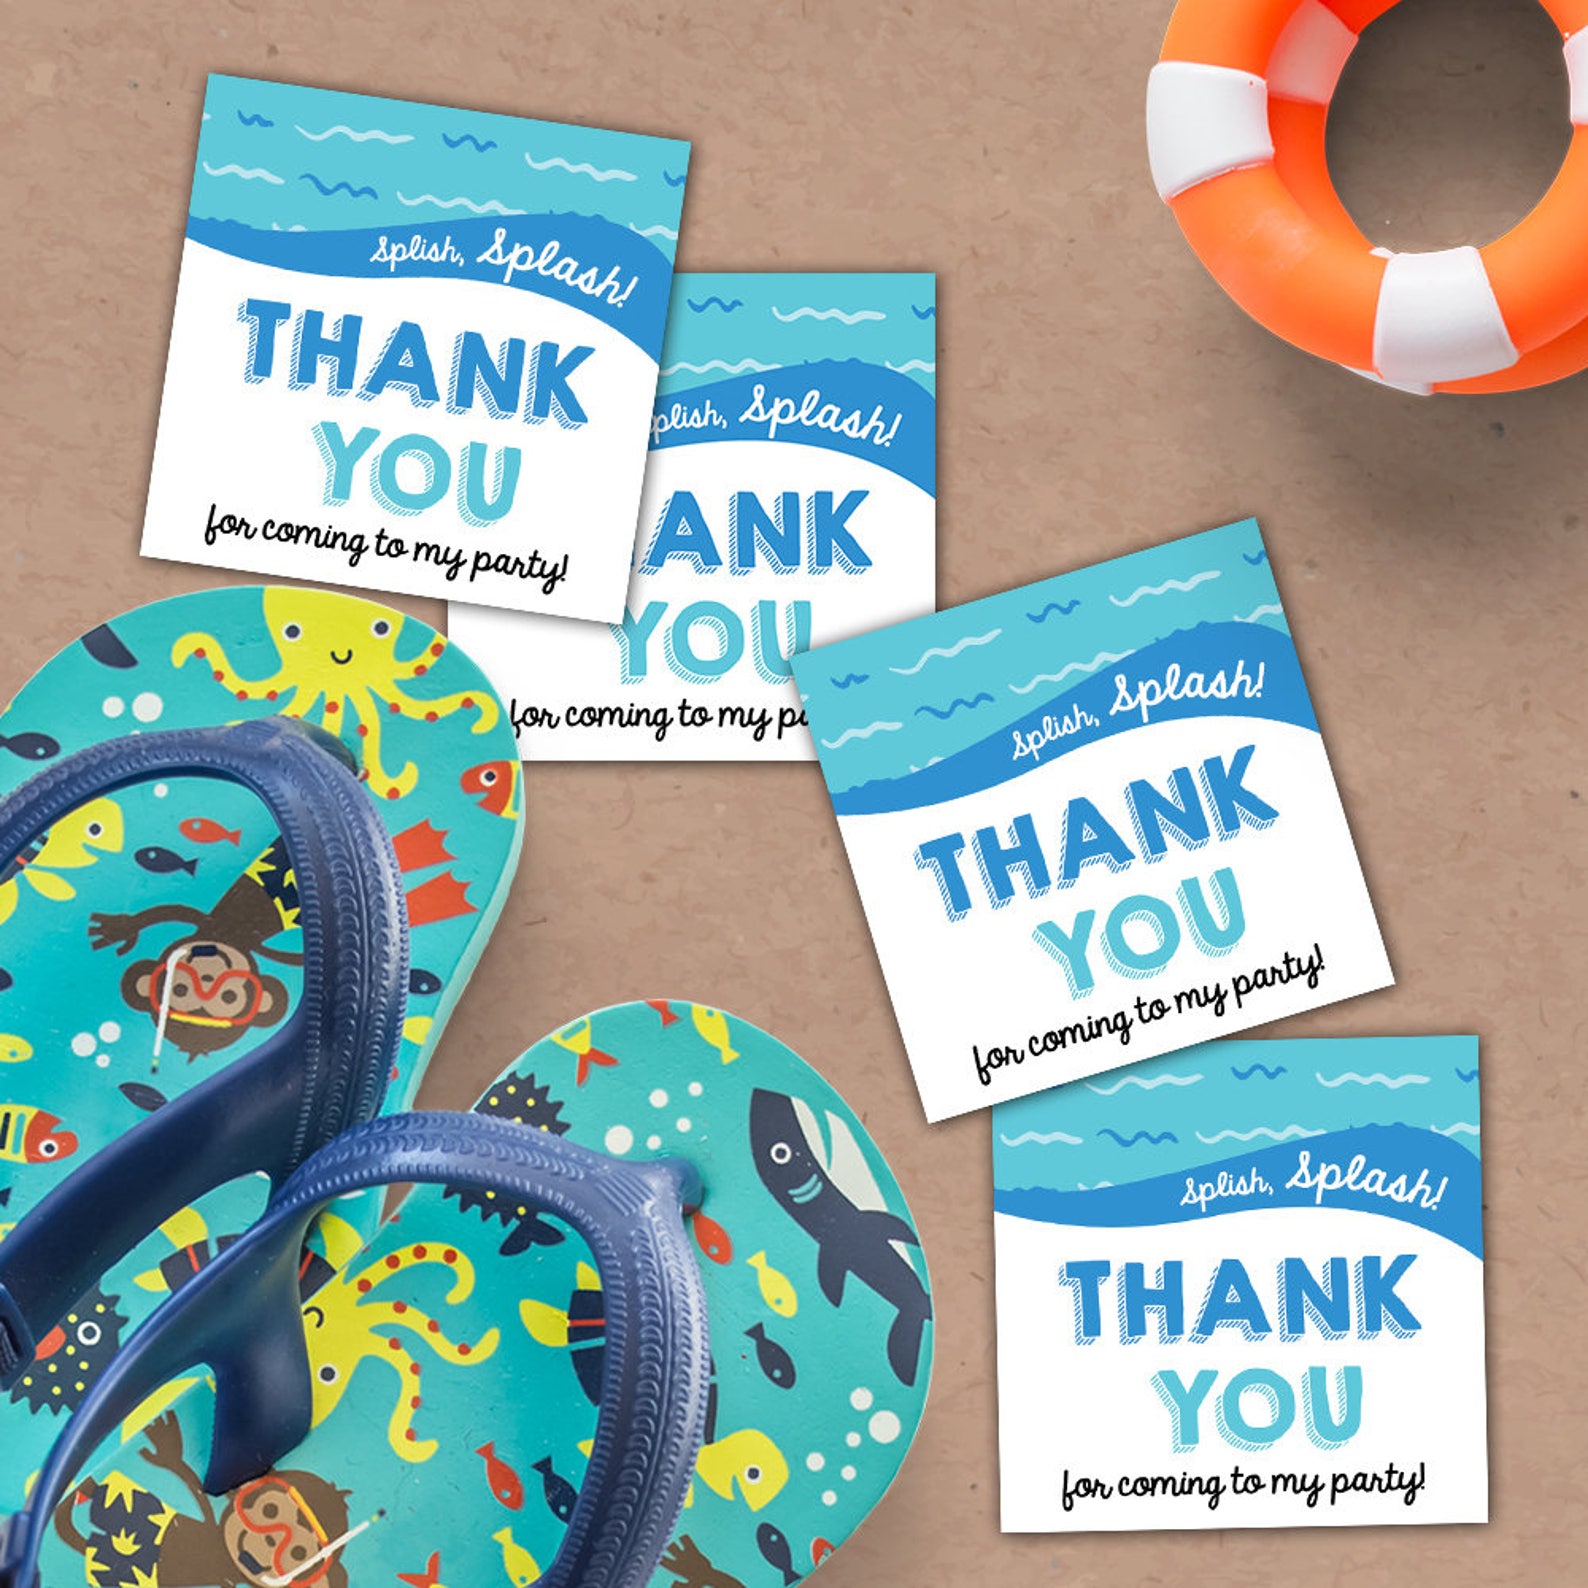 Pool party thank you tags